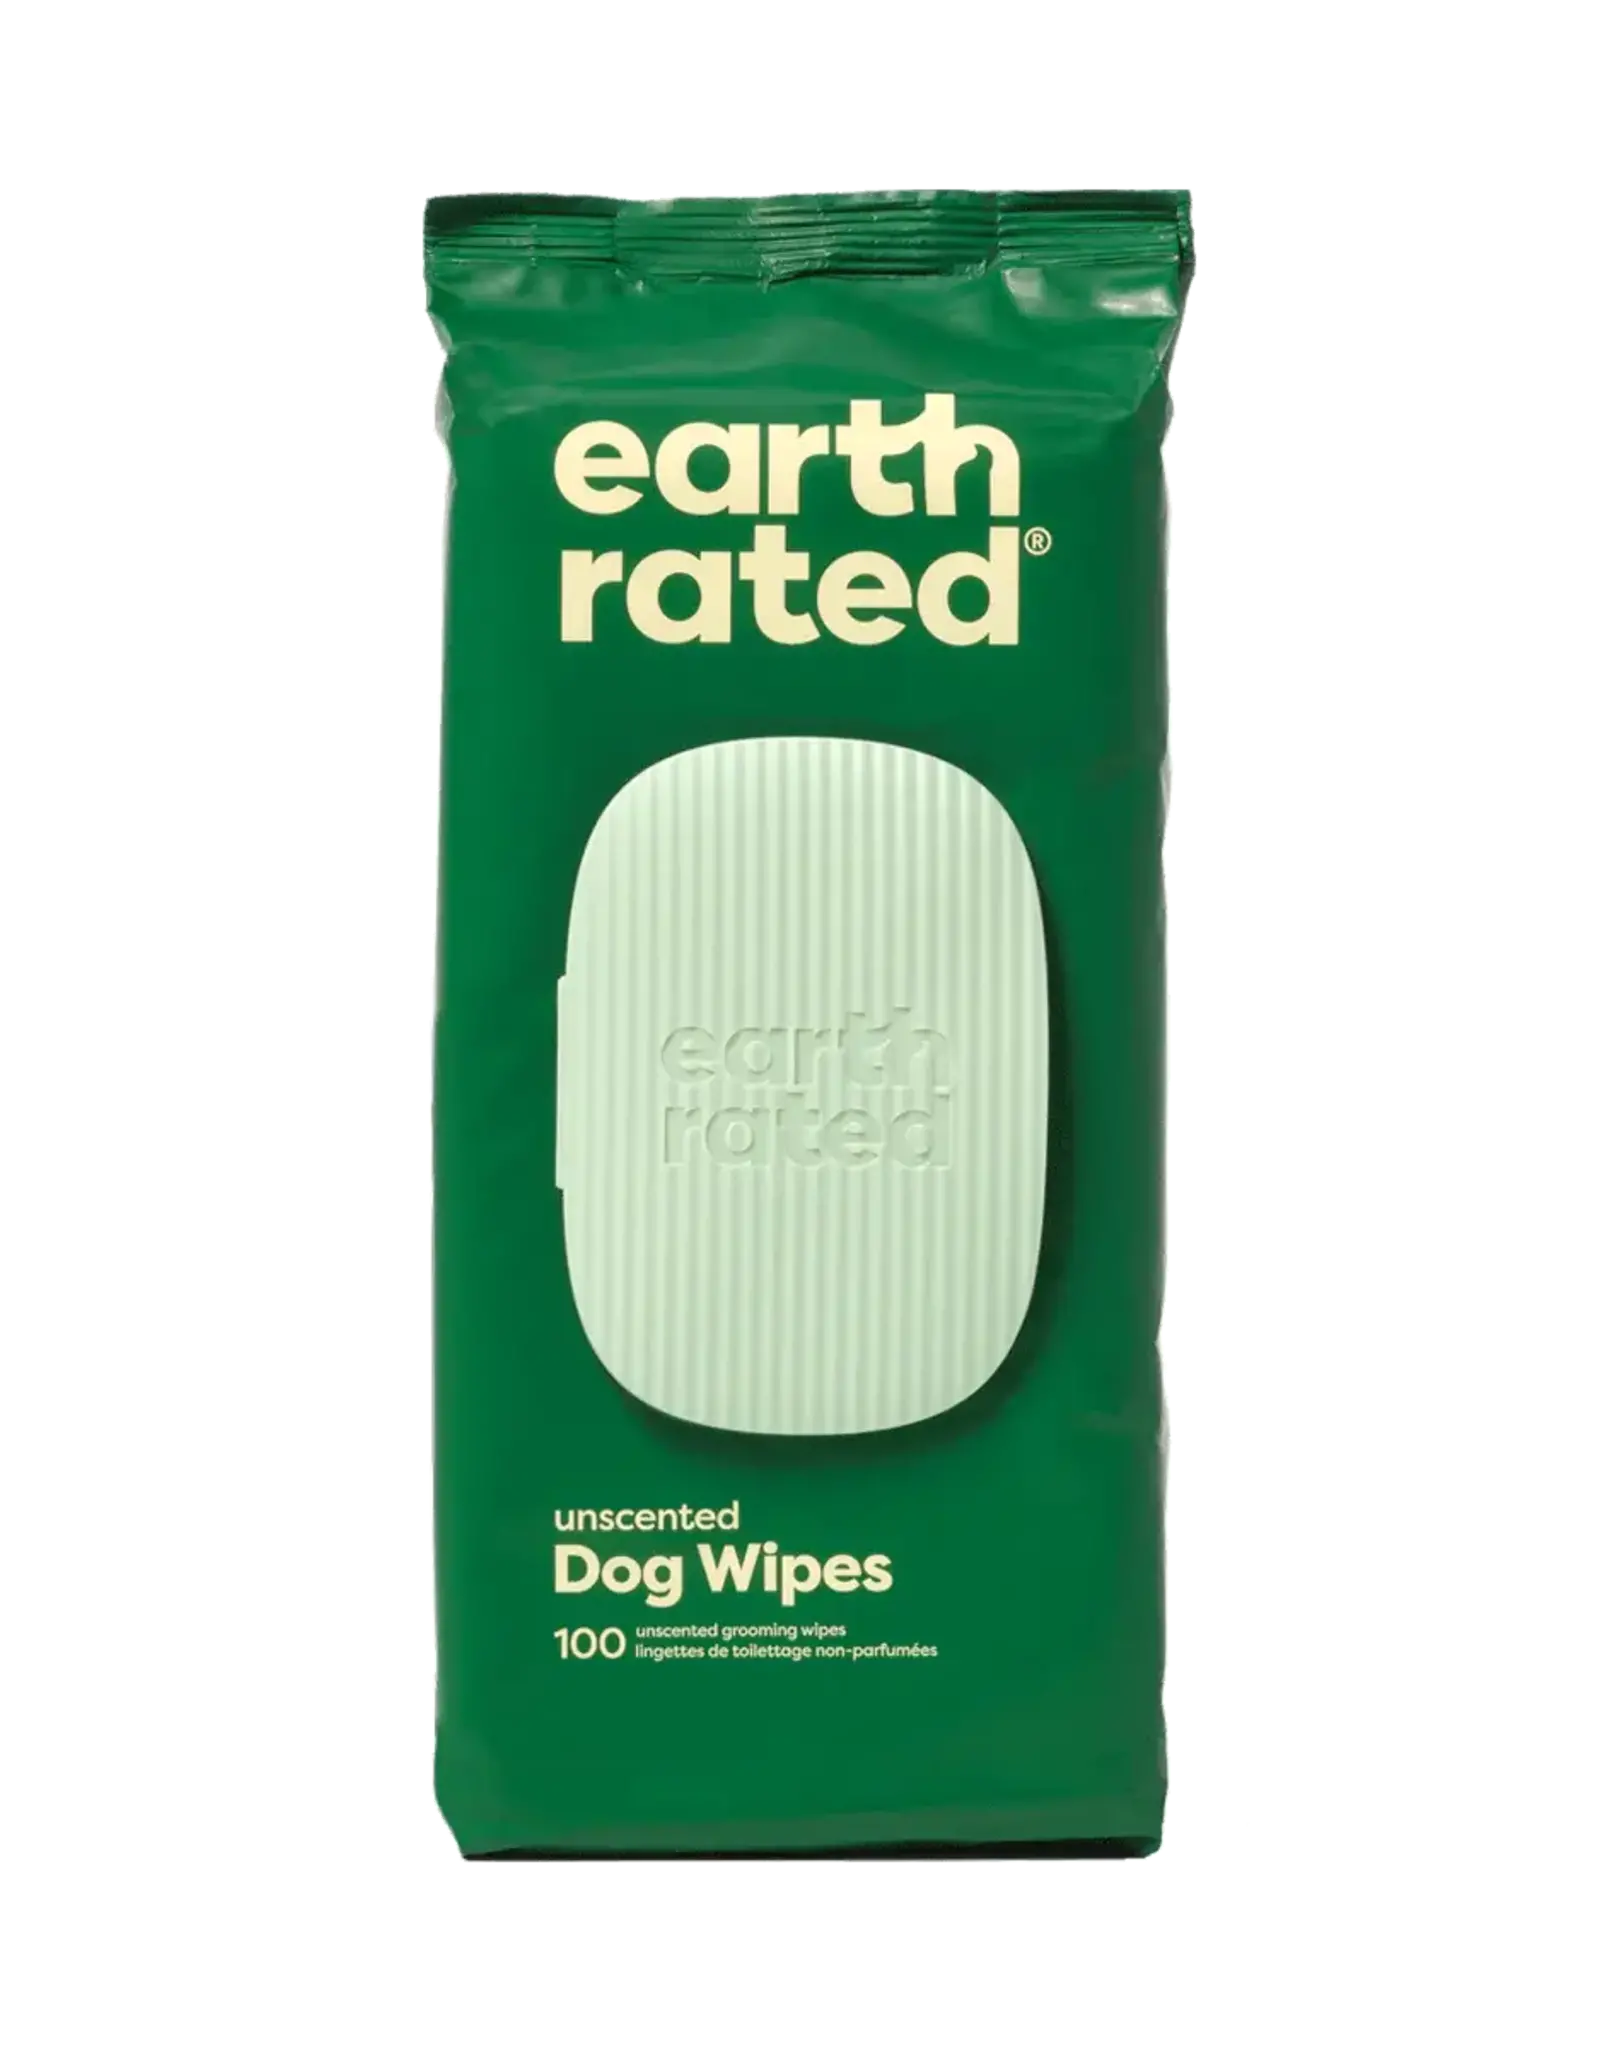 EARTH RATED EARTH RATED GROOMING WIPES UNSCENTED 100CT